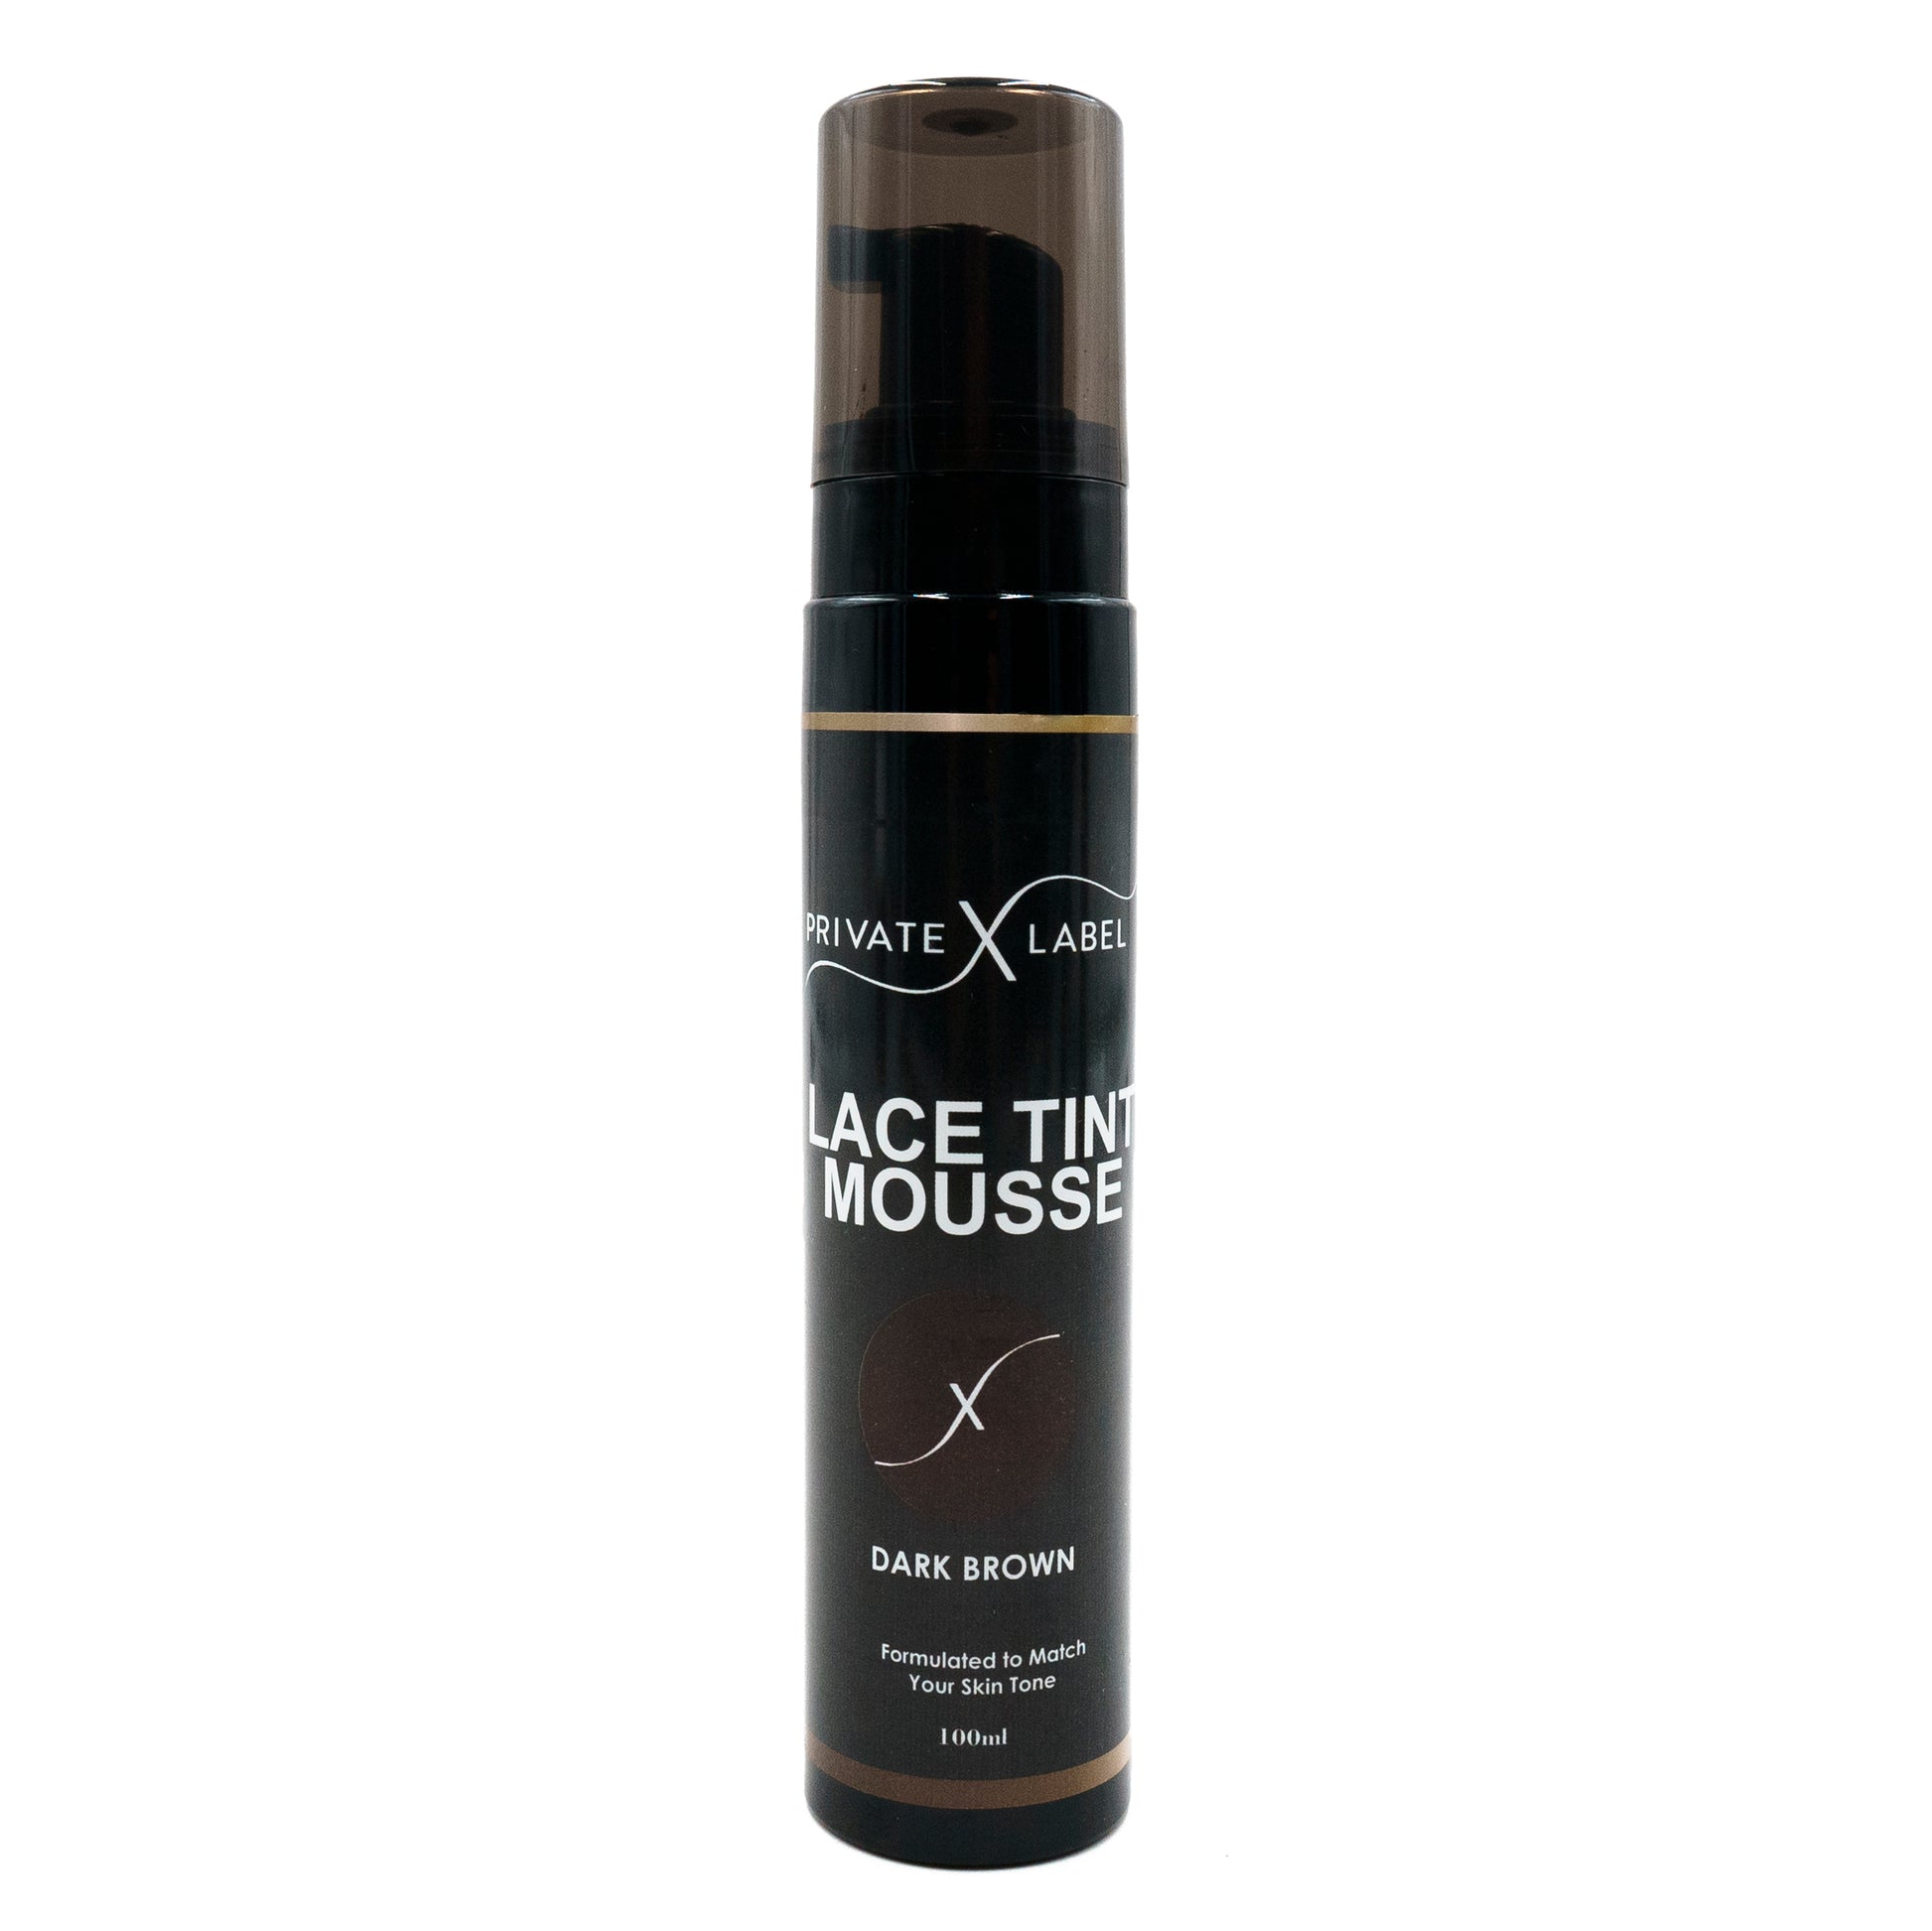 Lace Tint Mousse Dark Brown